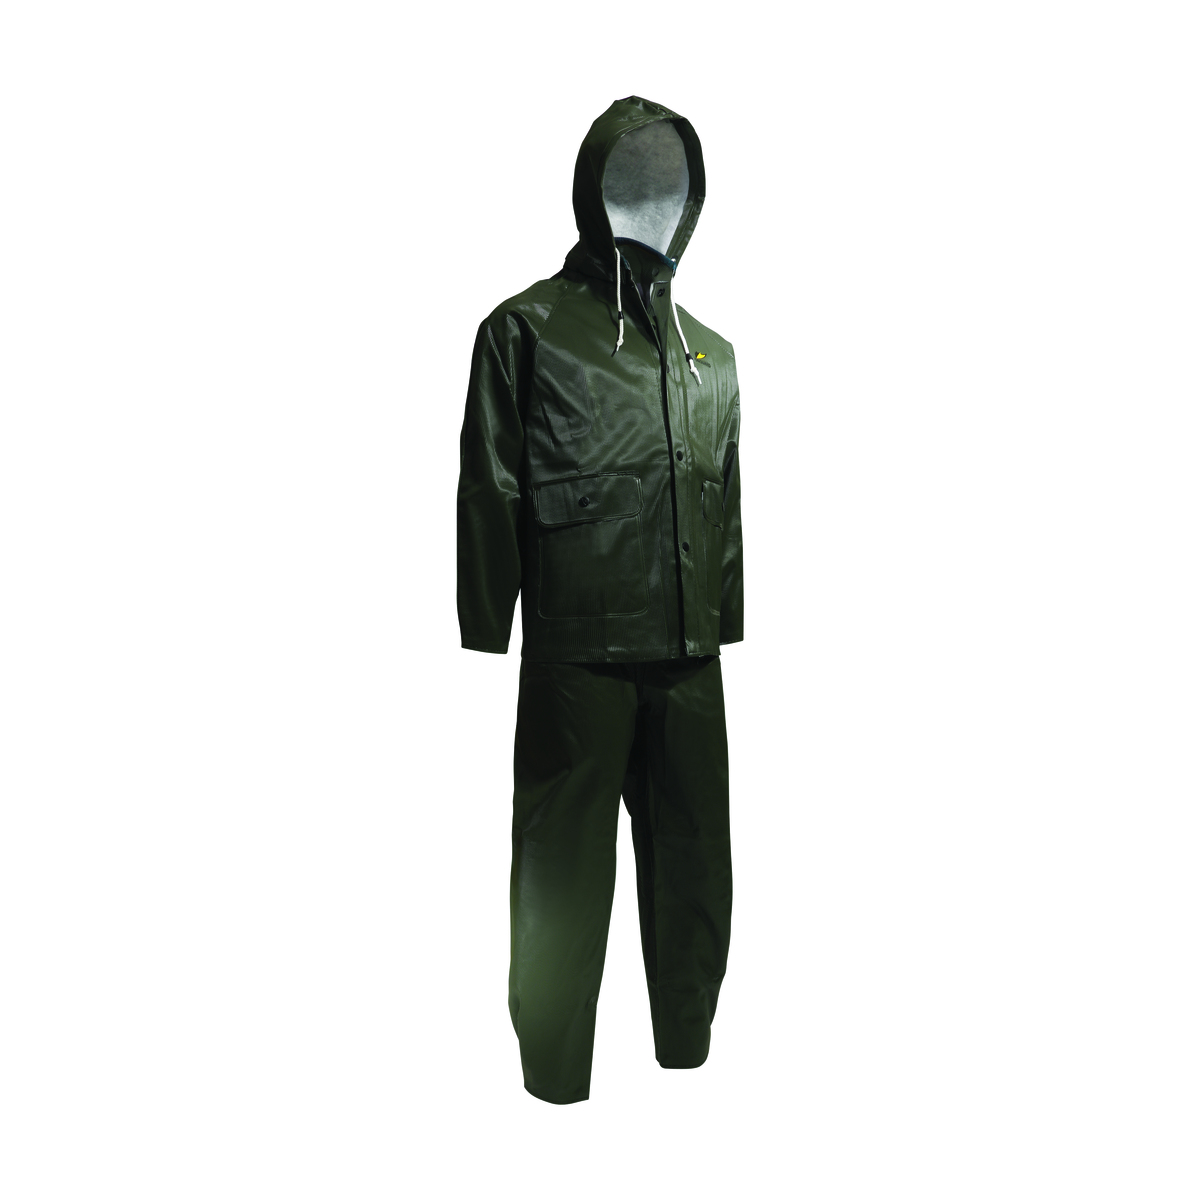 Dunlop® Protective Footwear Small Green Webtex .65 mm Polyester/PVC Rain Suit